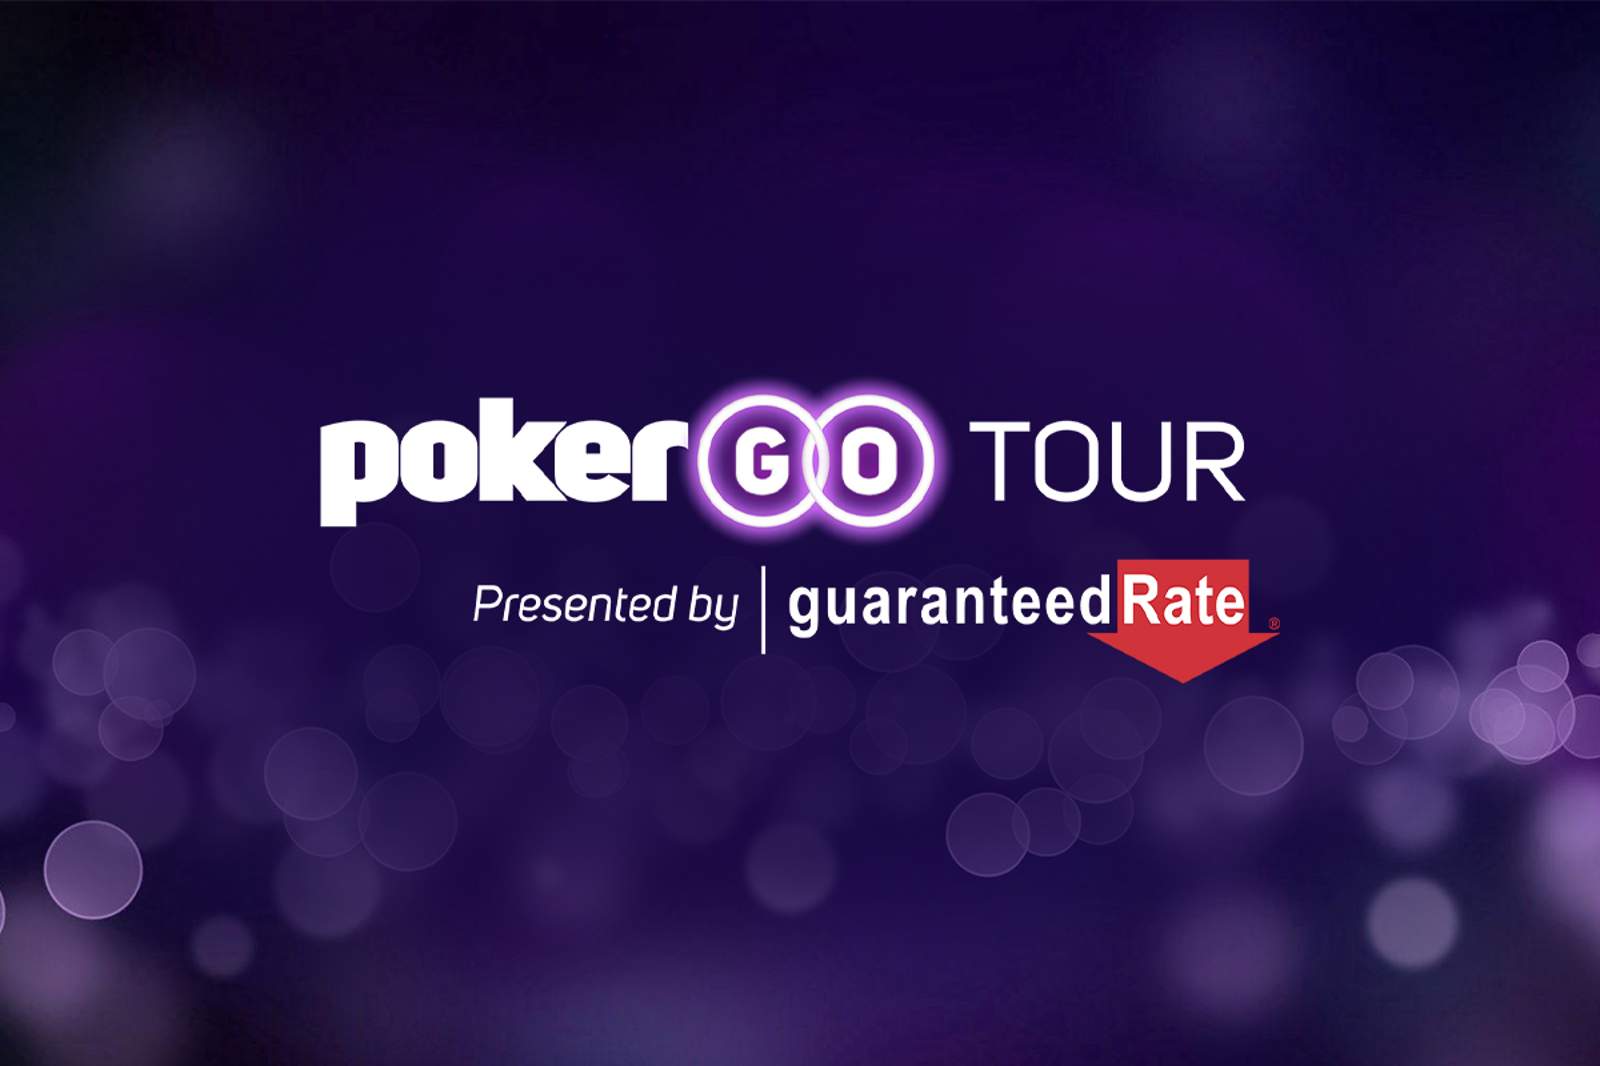 PokerGO Tour Concludes with $50,000 Buy-In PGT Championship December 20-21